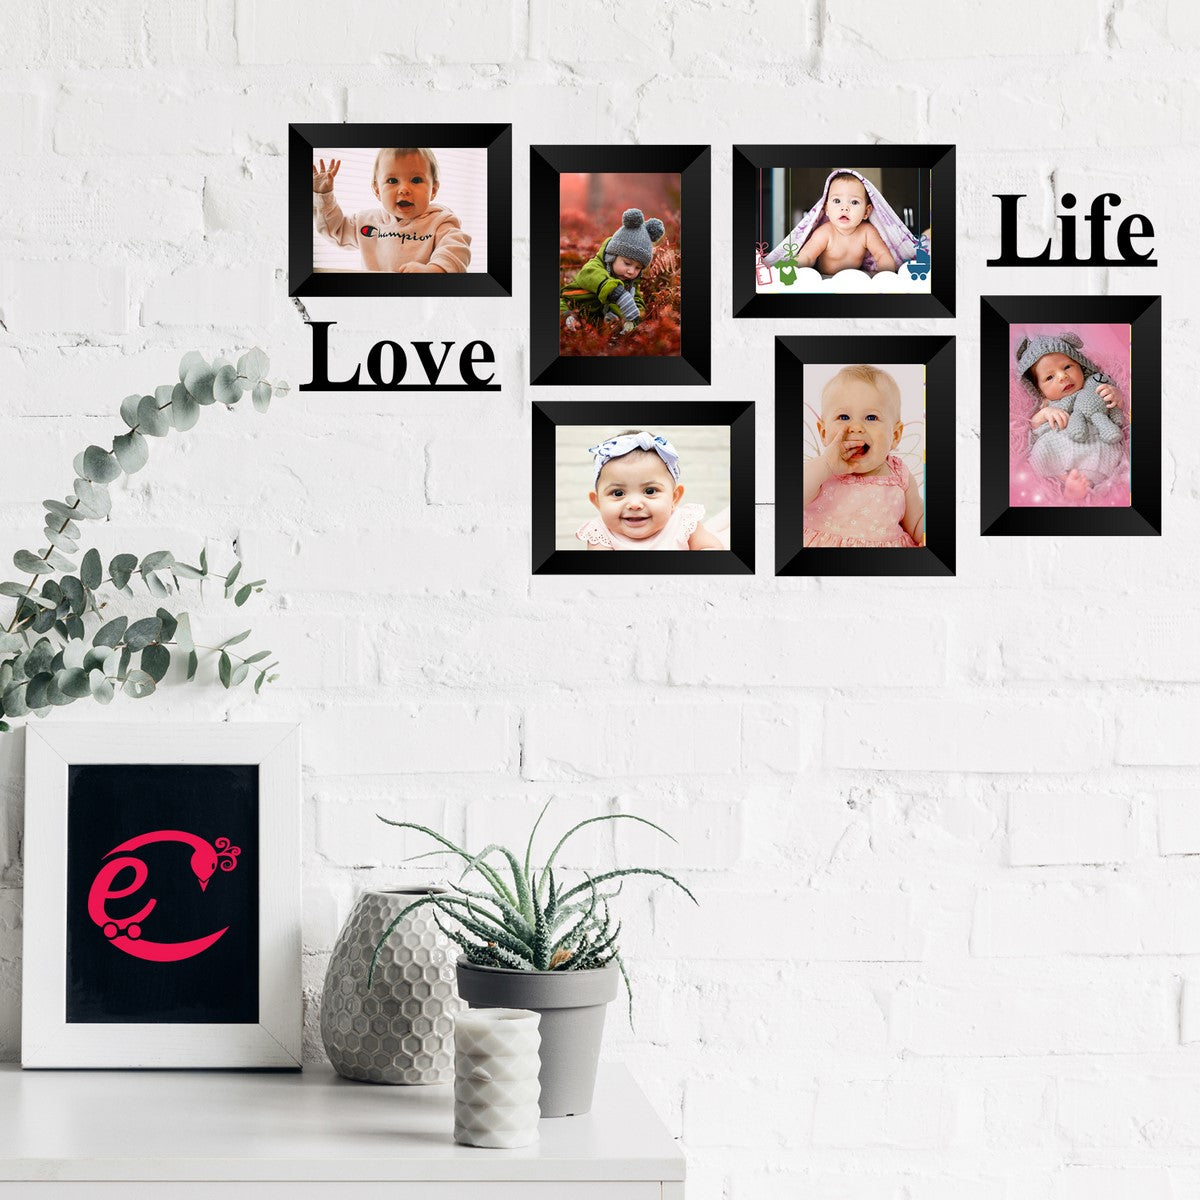 Memory Wall Collage Photo Frame - Set of 6 Photo Frames for 6 Photos of 5"x7", 1 piece of LOVE, 1 piece of LIFE 1